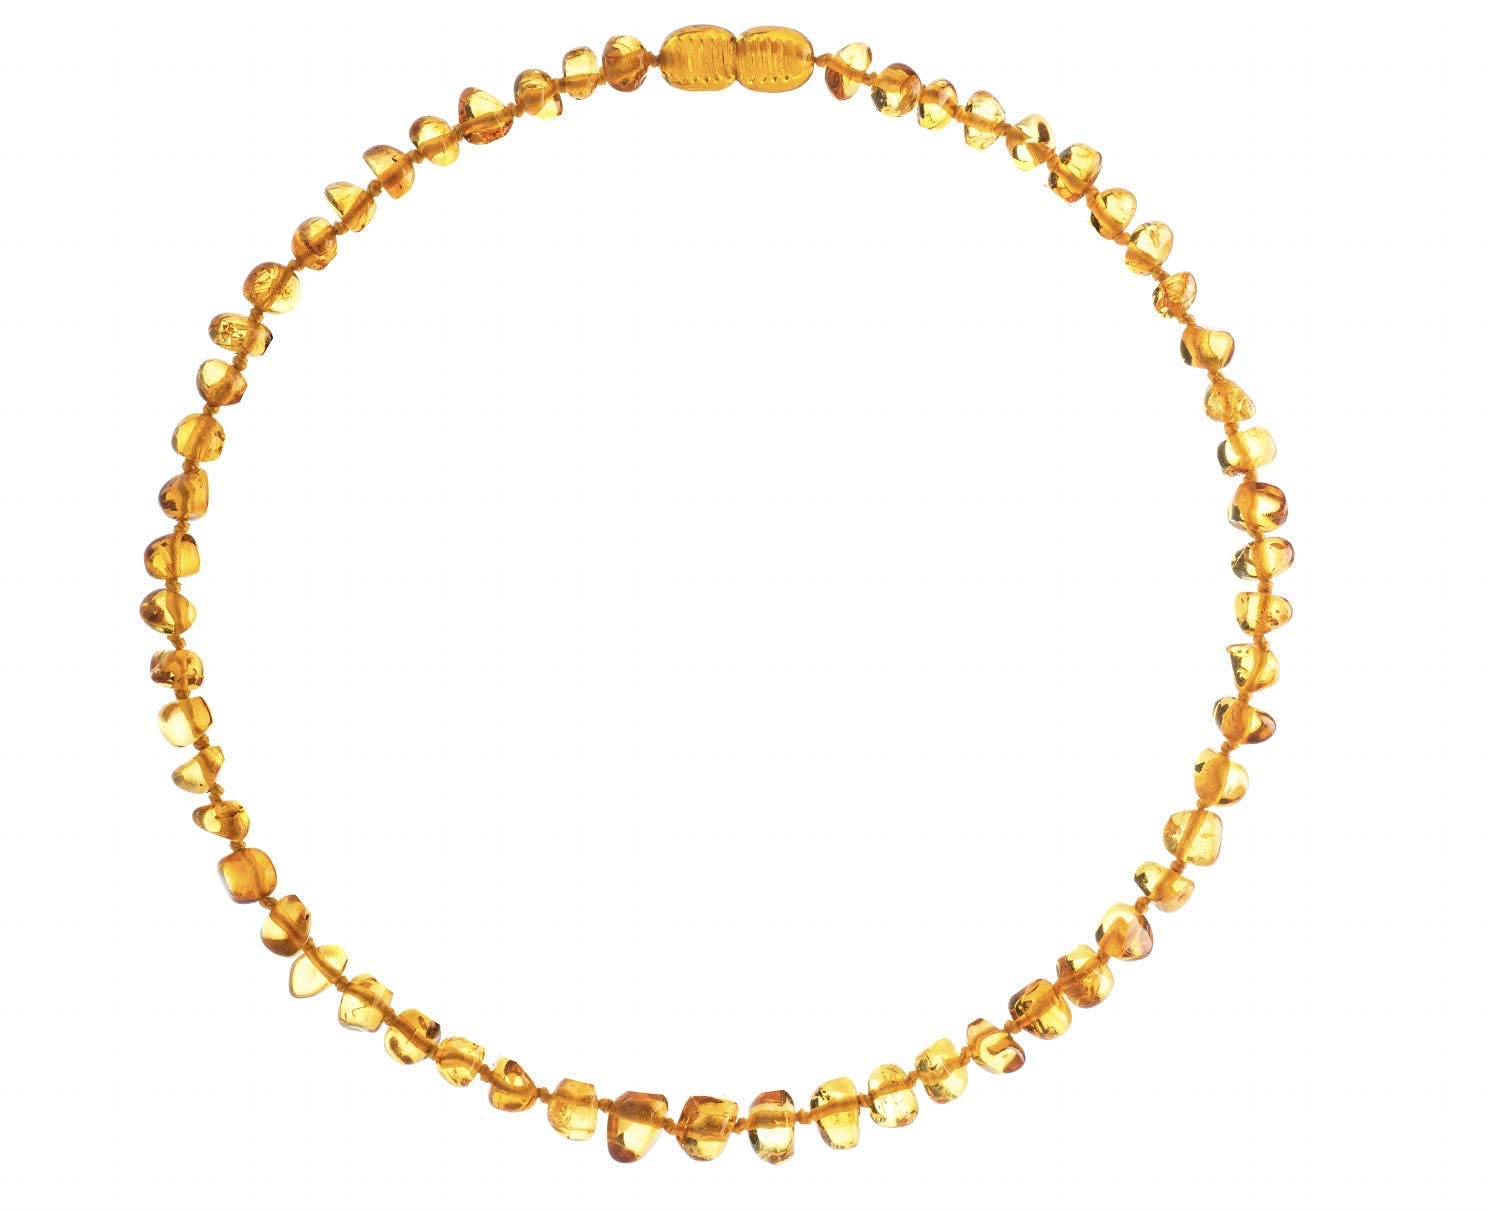 Baltic Wonder Baltic Amber Necklace (Baroque Honey) Unisex - 100% Certified Authentic Baltic.